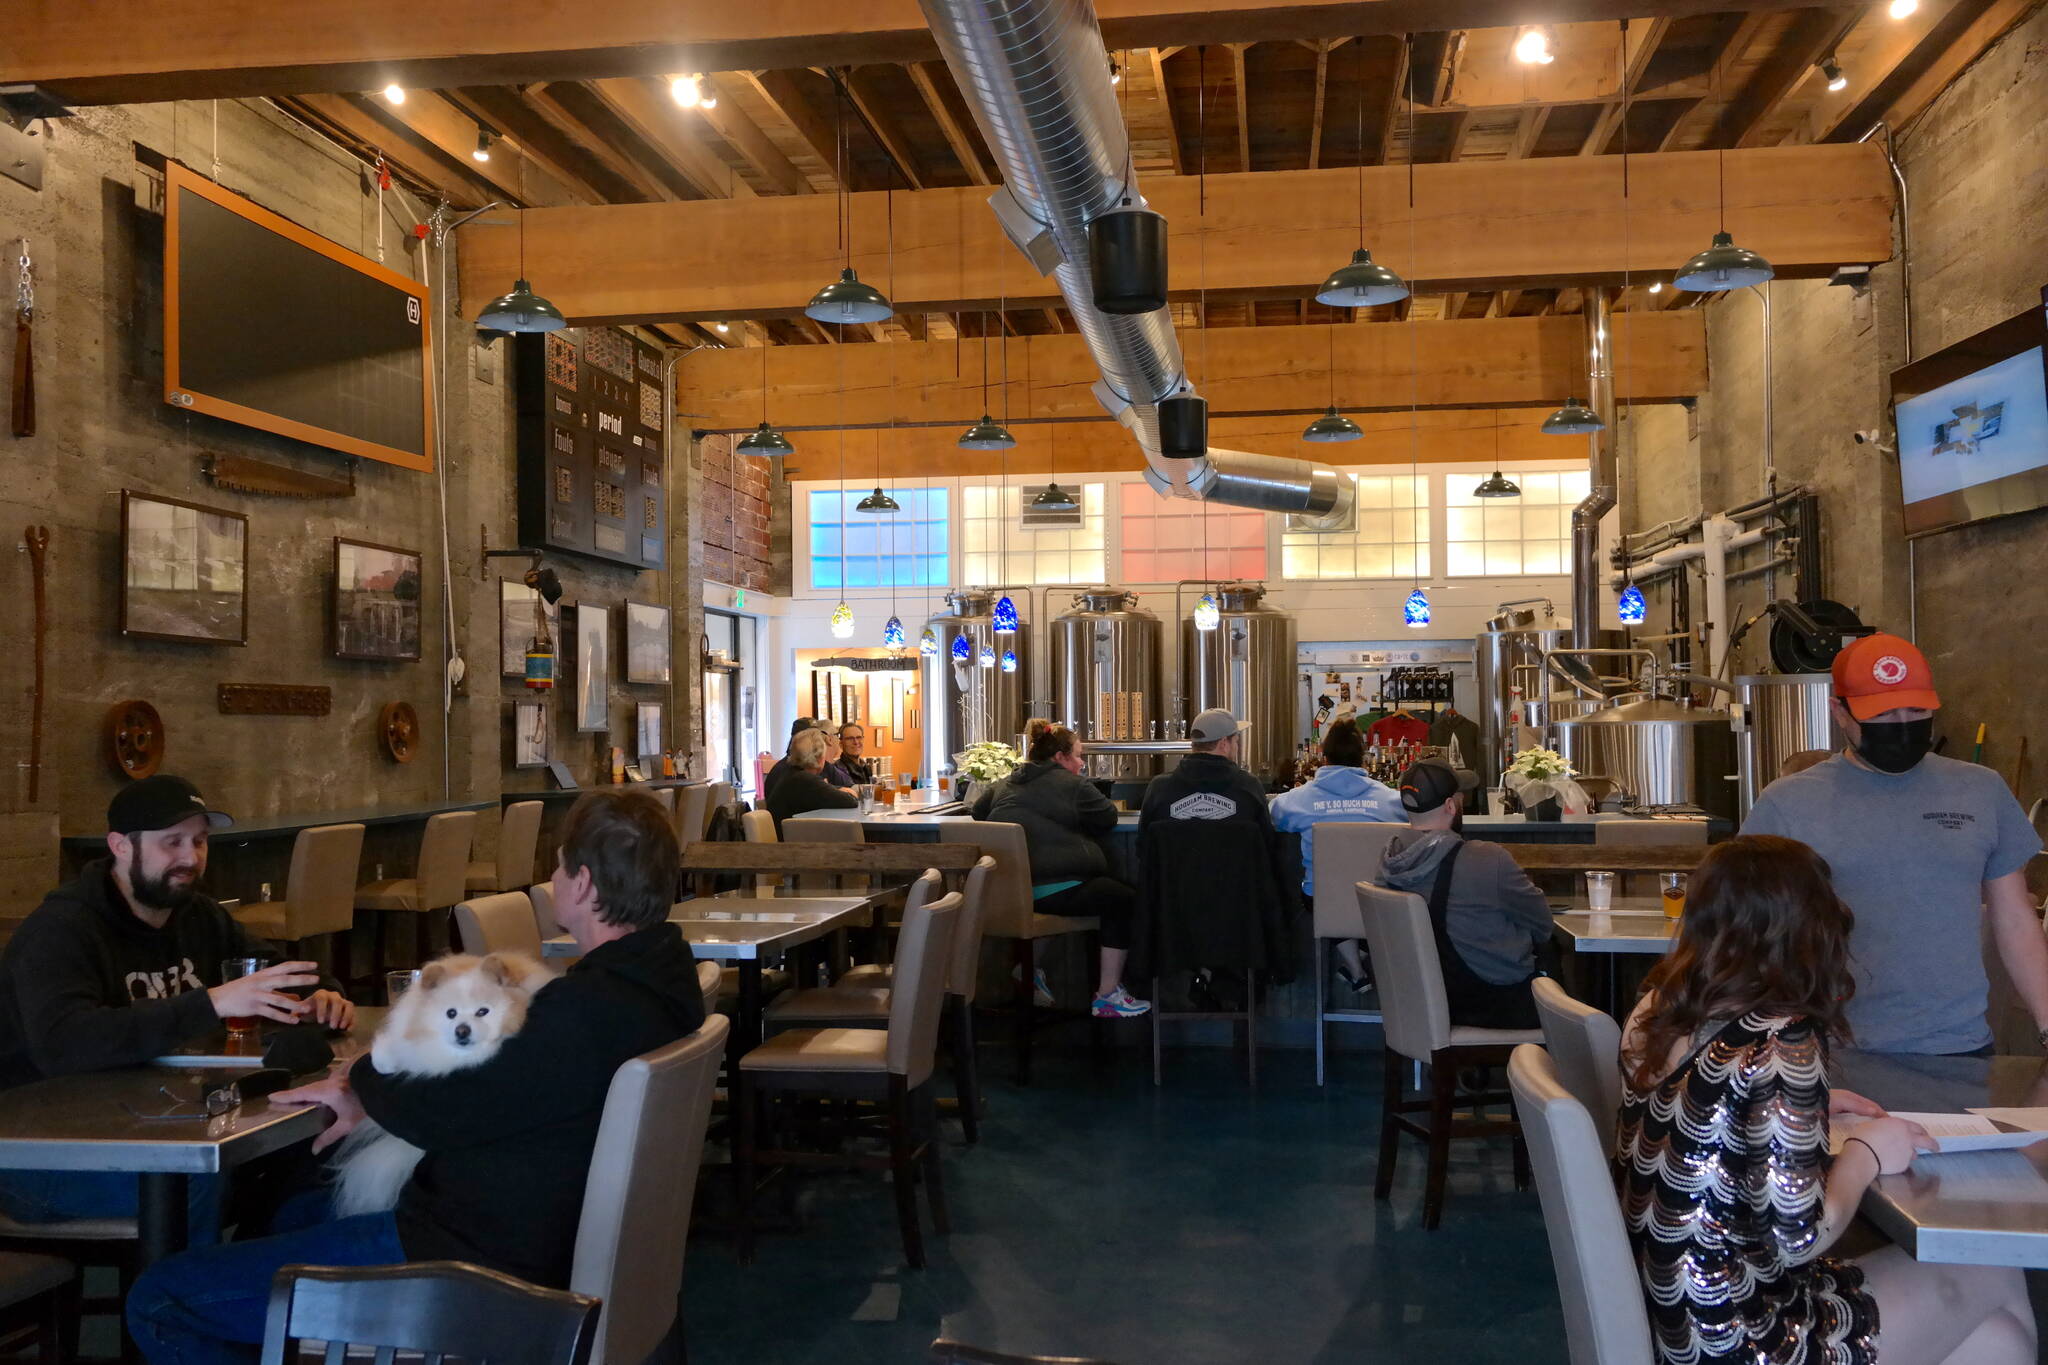 Patrons enjoy a Friday afternoon at Hoquiam Brewing Co. on Feb. 18, 2022. According to co-owner Rob Paylor, the recently expanded kitchen and dining menu has been well-received by the public and features “Northwest Brewery pub-style” cuisine. Erika Gebhardt I The Daily World